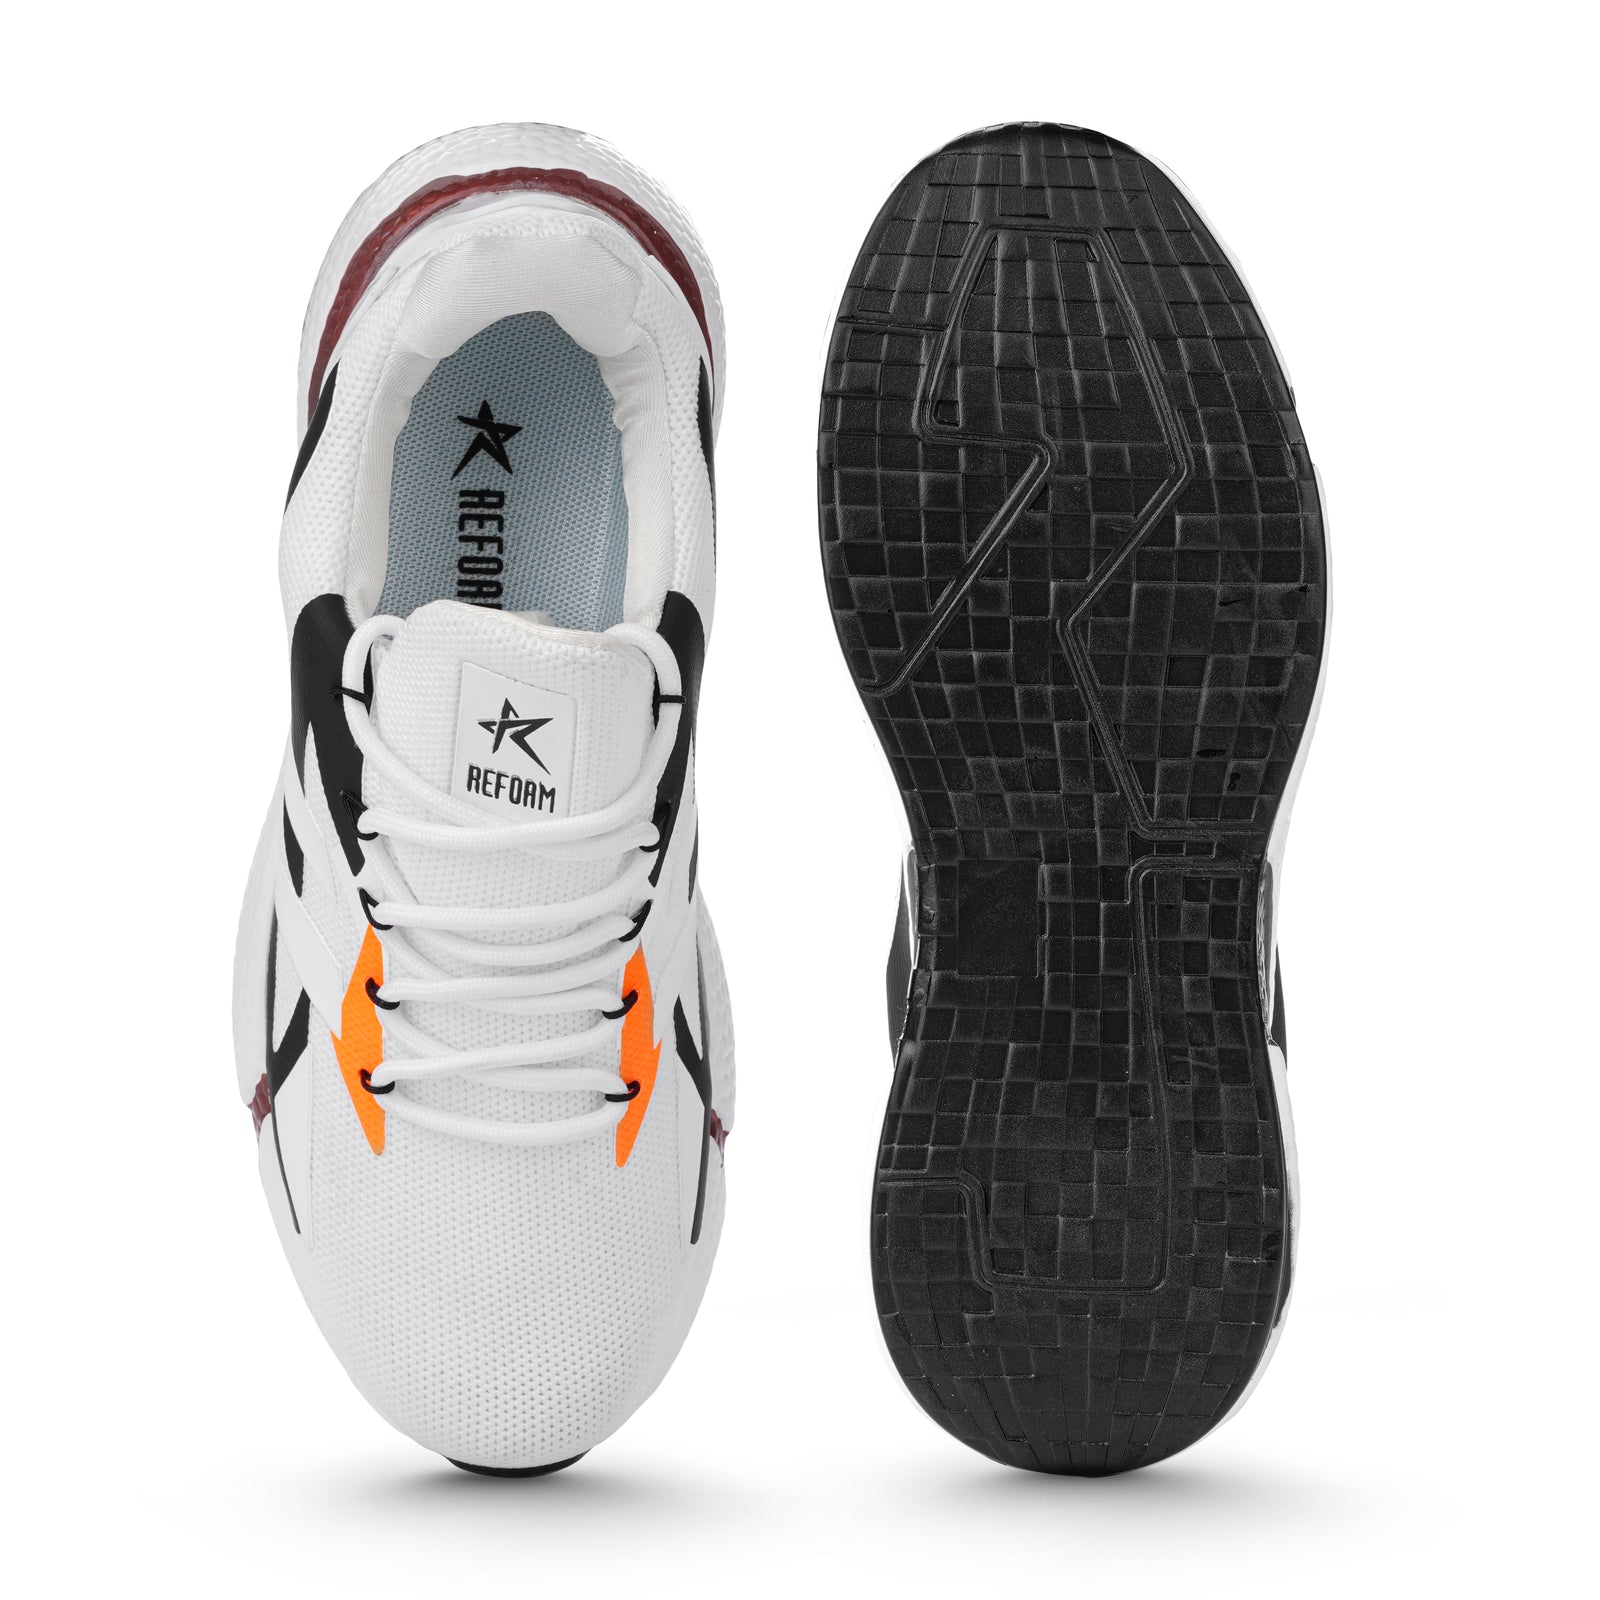 White Solid Mesh Lace Up Running Sport Shoes For Men